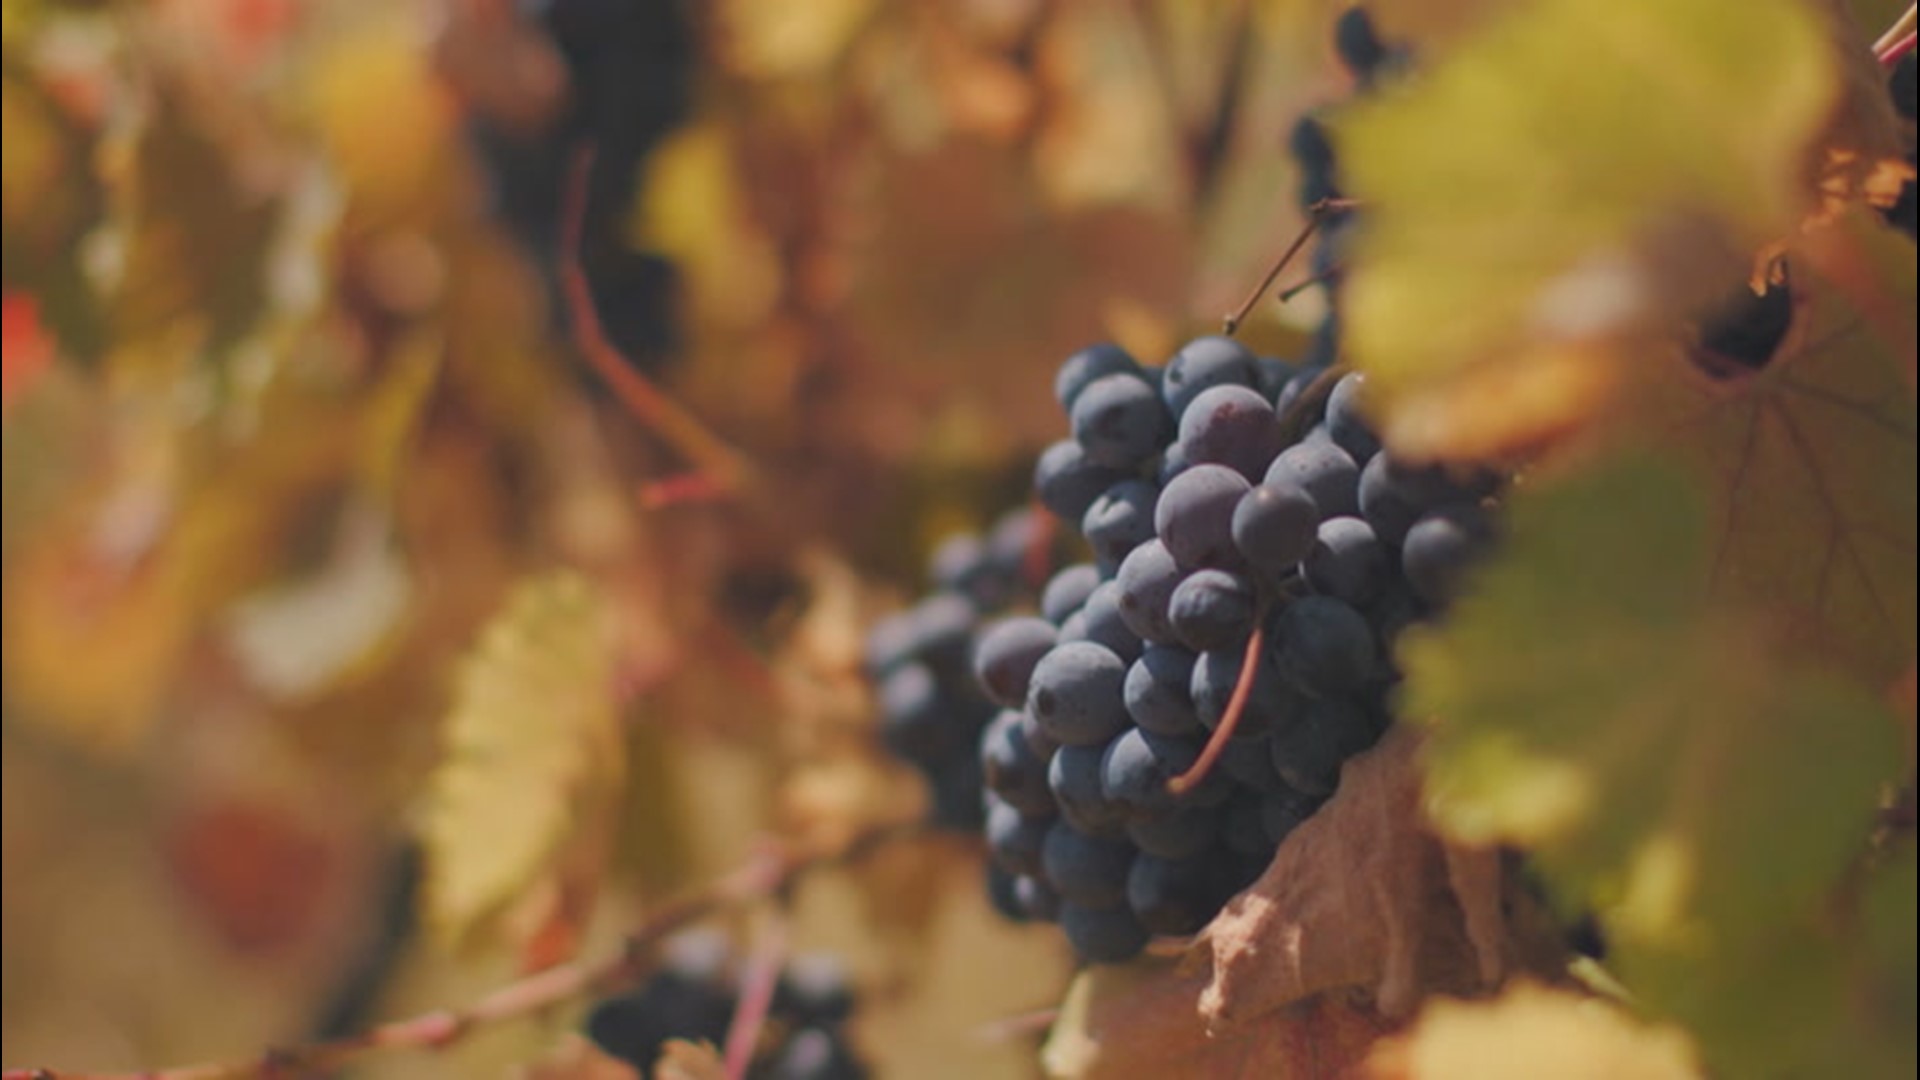 AccuWeather's Dexter Henry takes a look at how a region's climate can impact wine.